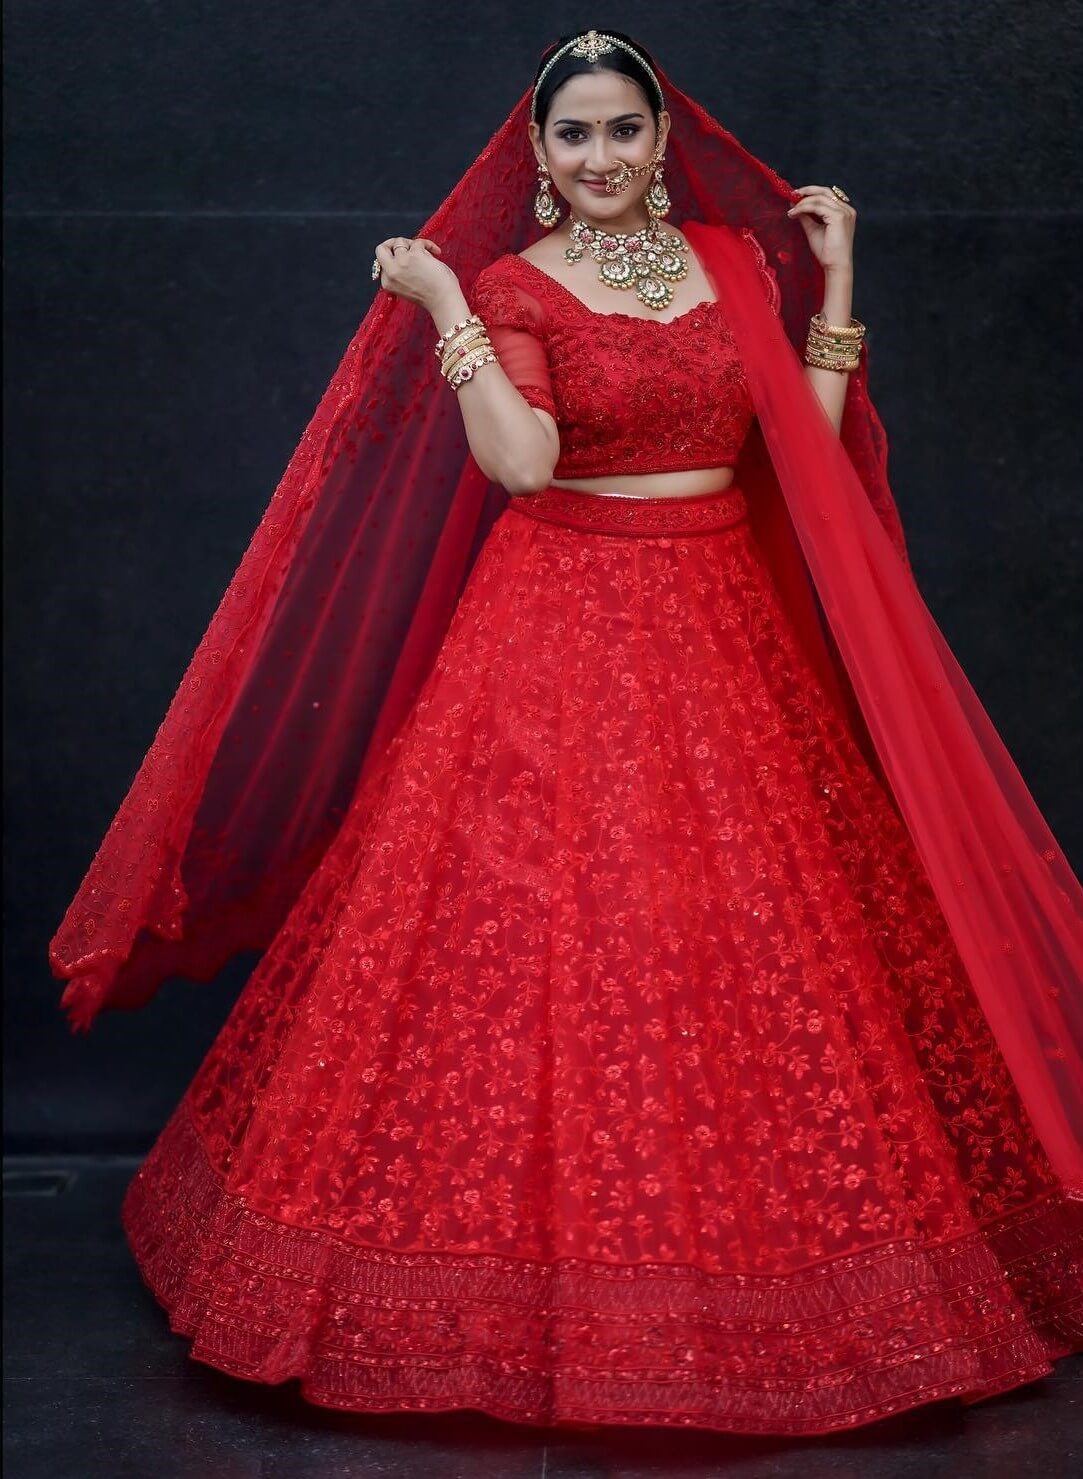 Aditi Ravi Regal Red Heavily Embellished Soft Net Lehenga Choli With Intricate Hand Embroidery Inspired Best Outfit & Looks Collection